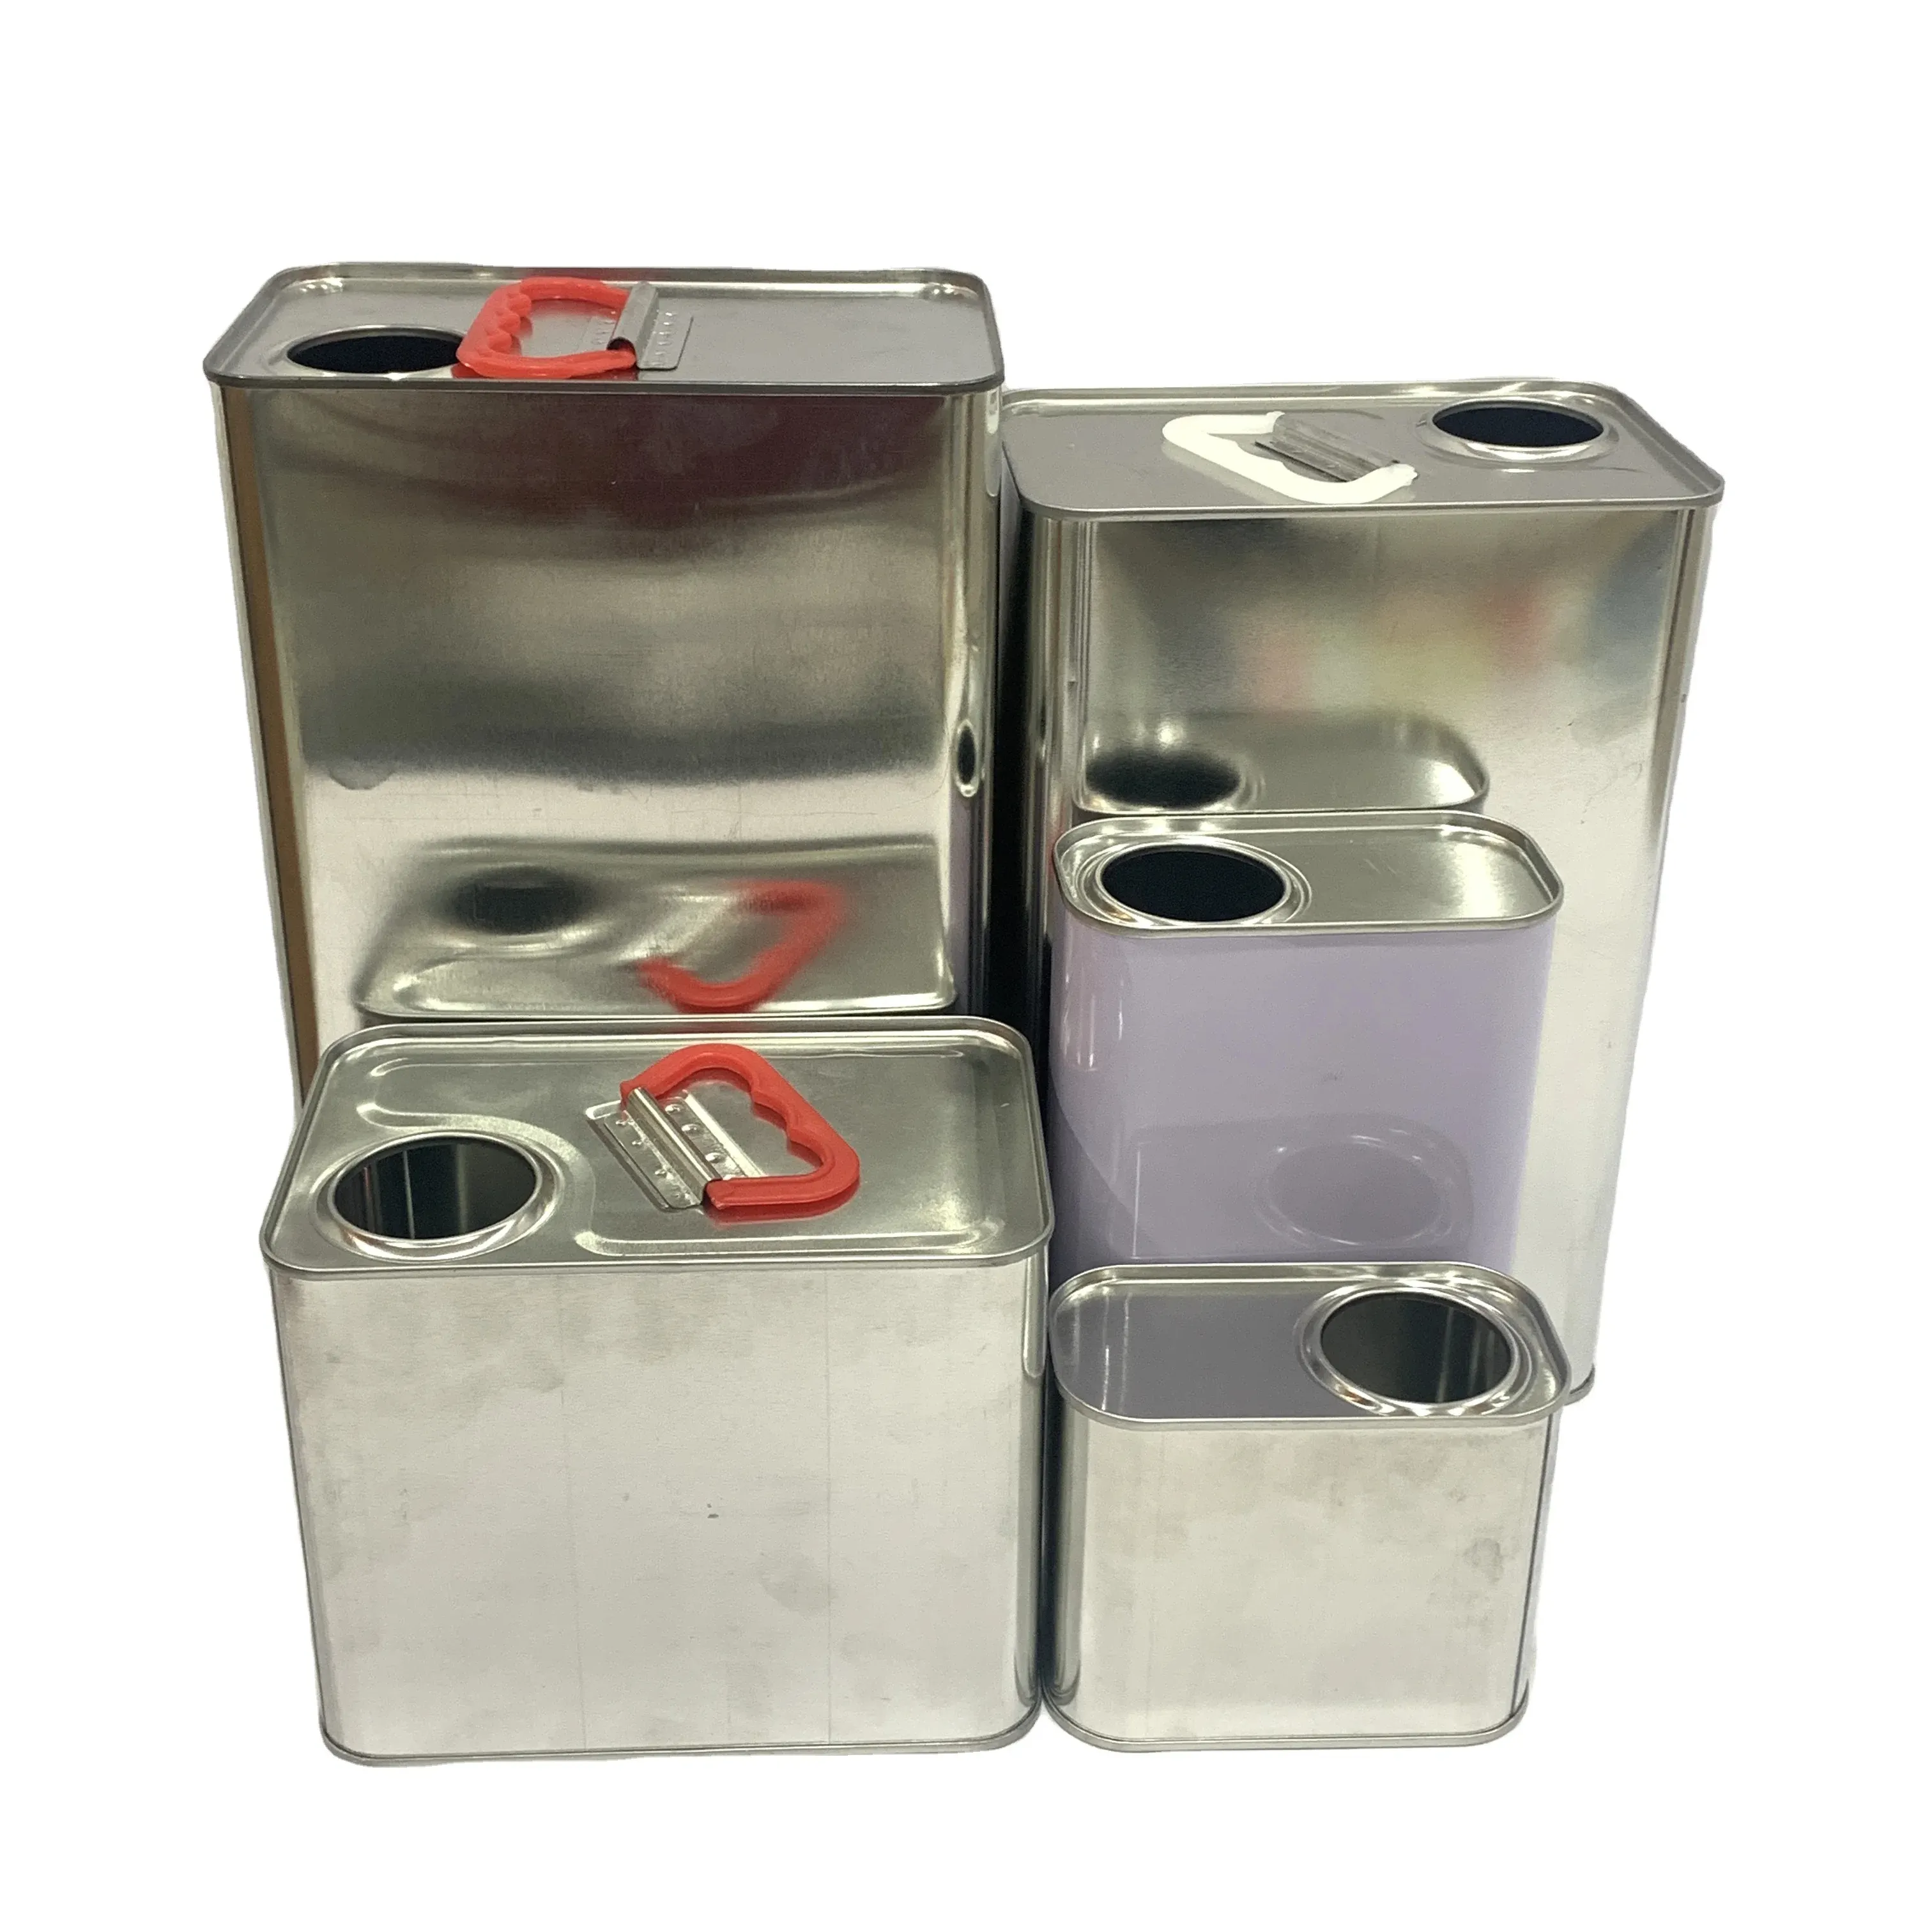 Custom Packaging Large Capacity Rectangular Metal Cans 500mL-5L Tin Can Vessels for Chemical Packaging 1L-5L Sizes Customizable